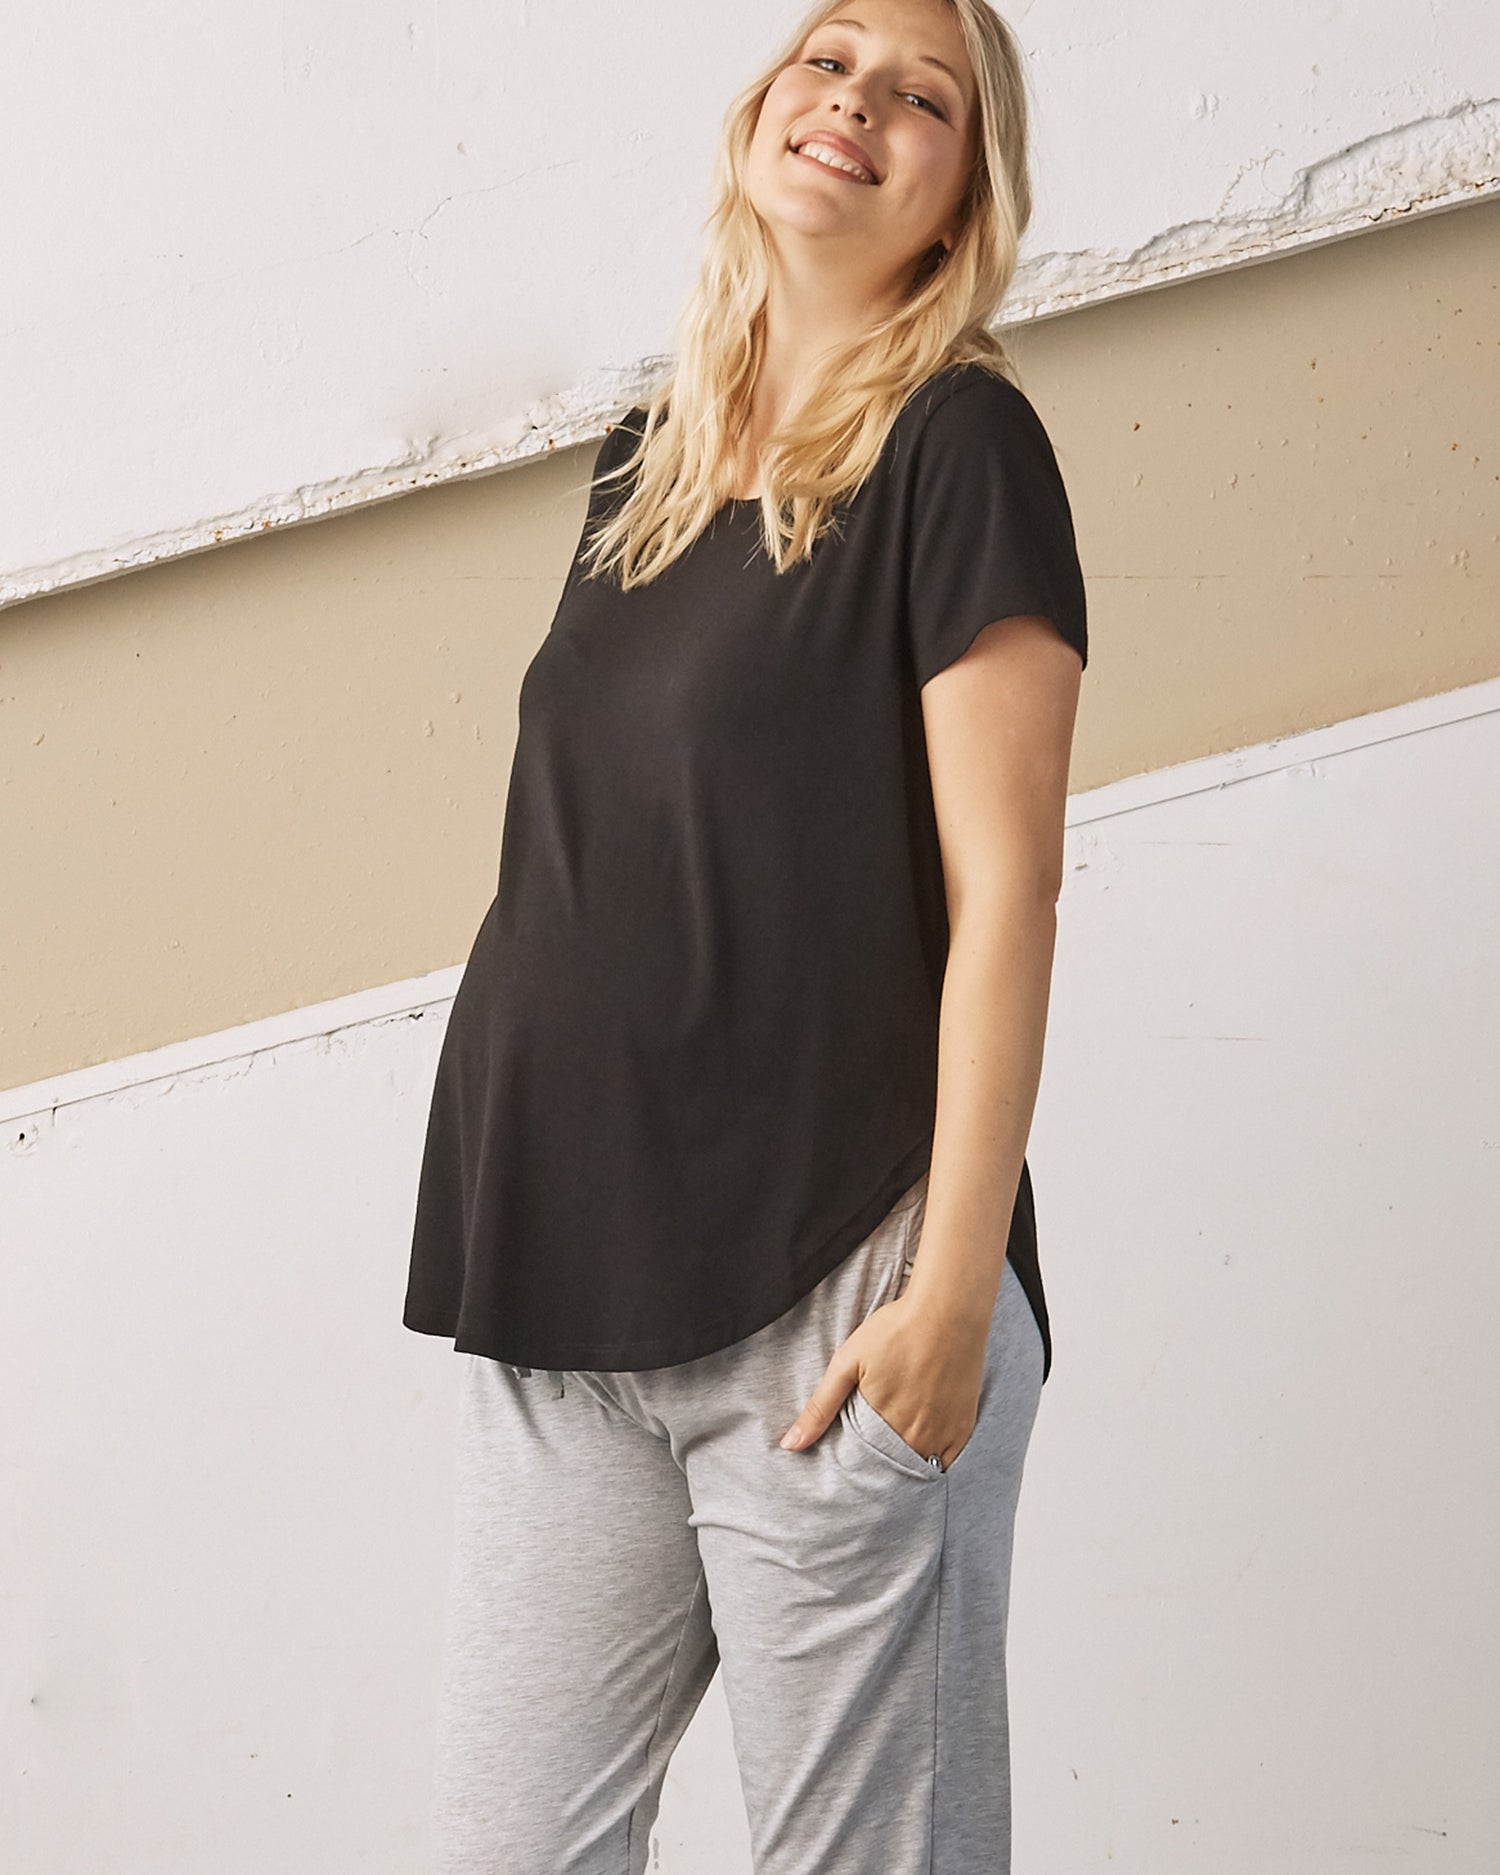 Main view - A Pregnant Woman in Black Basic Maternity Bamboo/Cotton T-shirt (6709414953063)